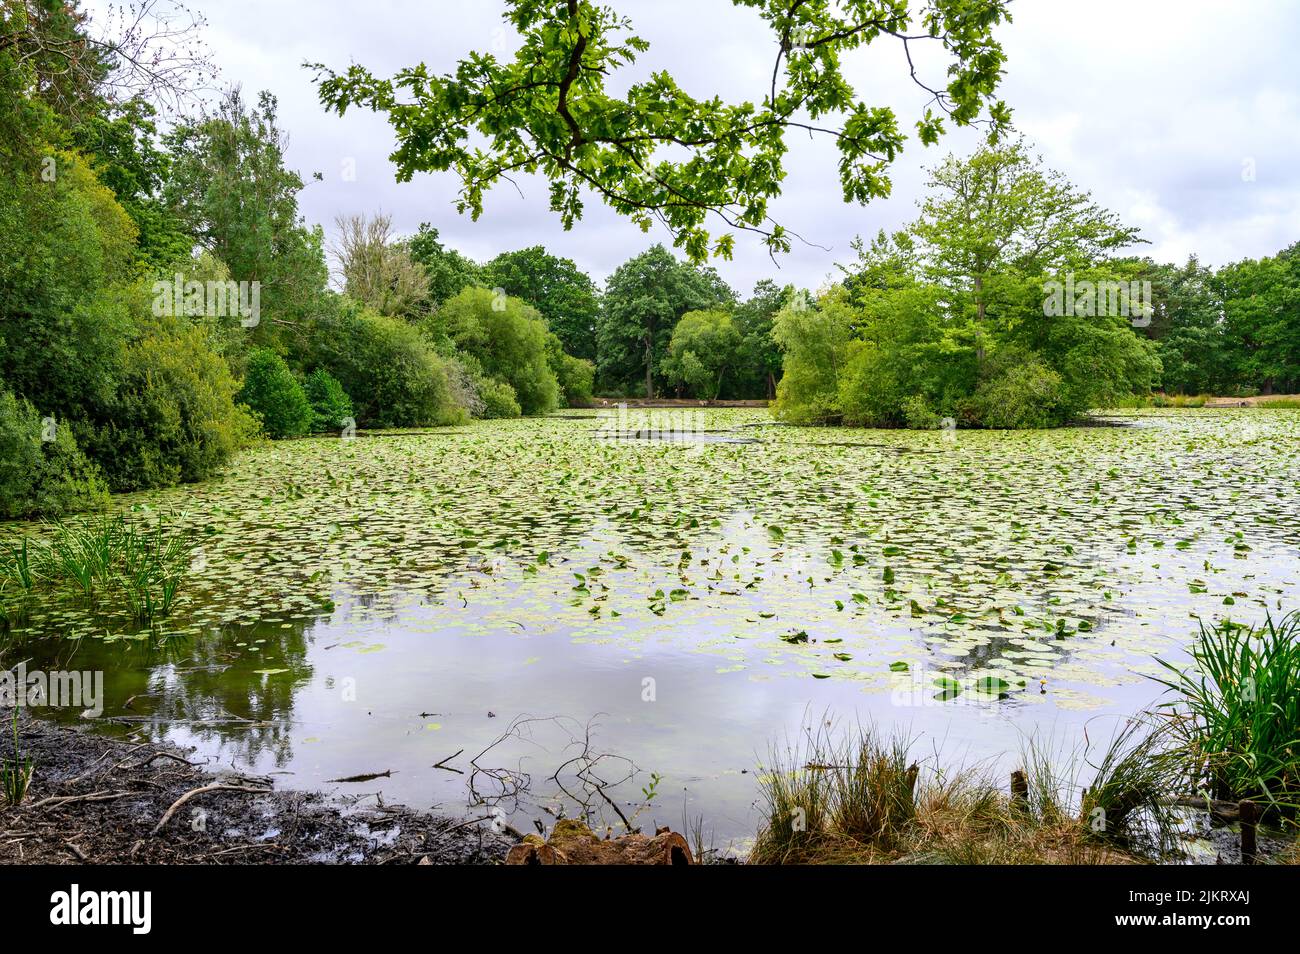 A pond near the battlefield of the Battle of Hastings in 1066, Battle, East Sussex, England. Stock Photo